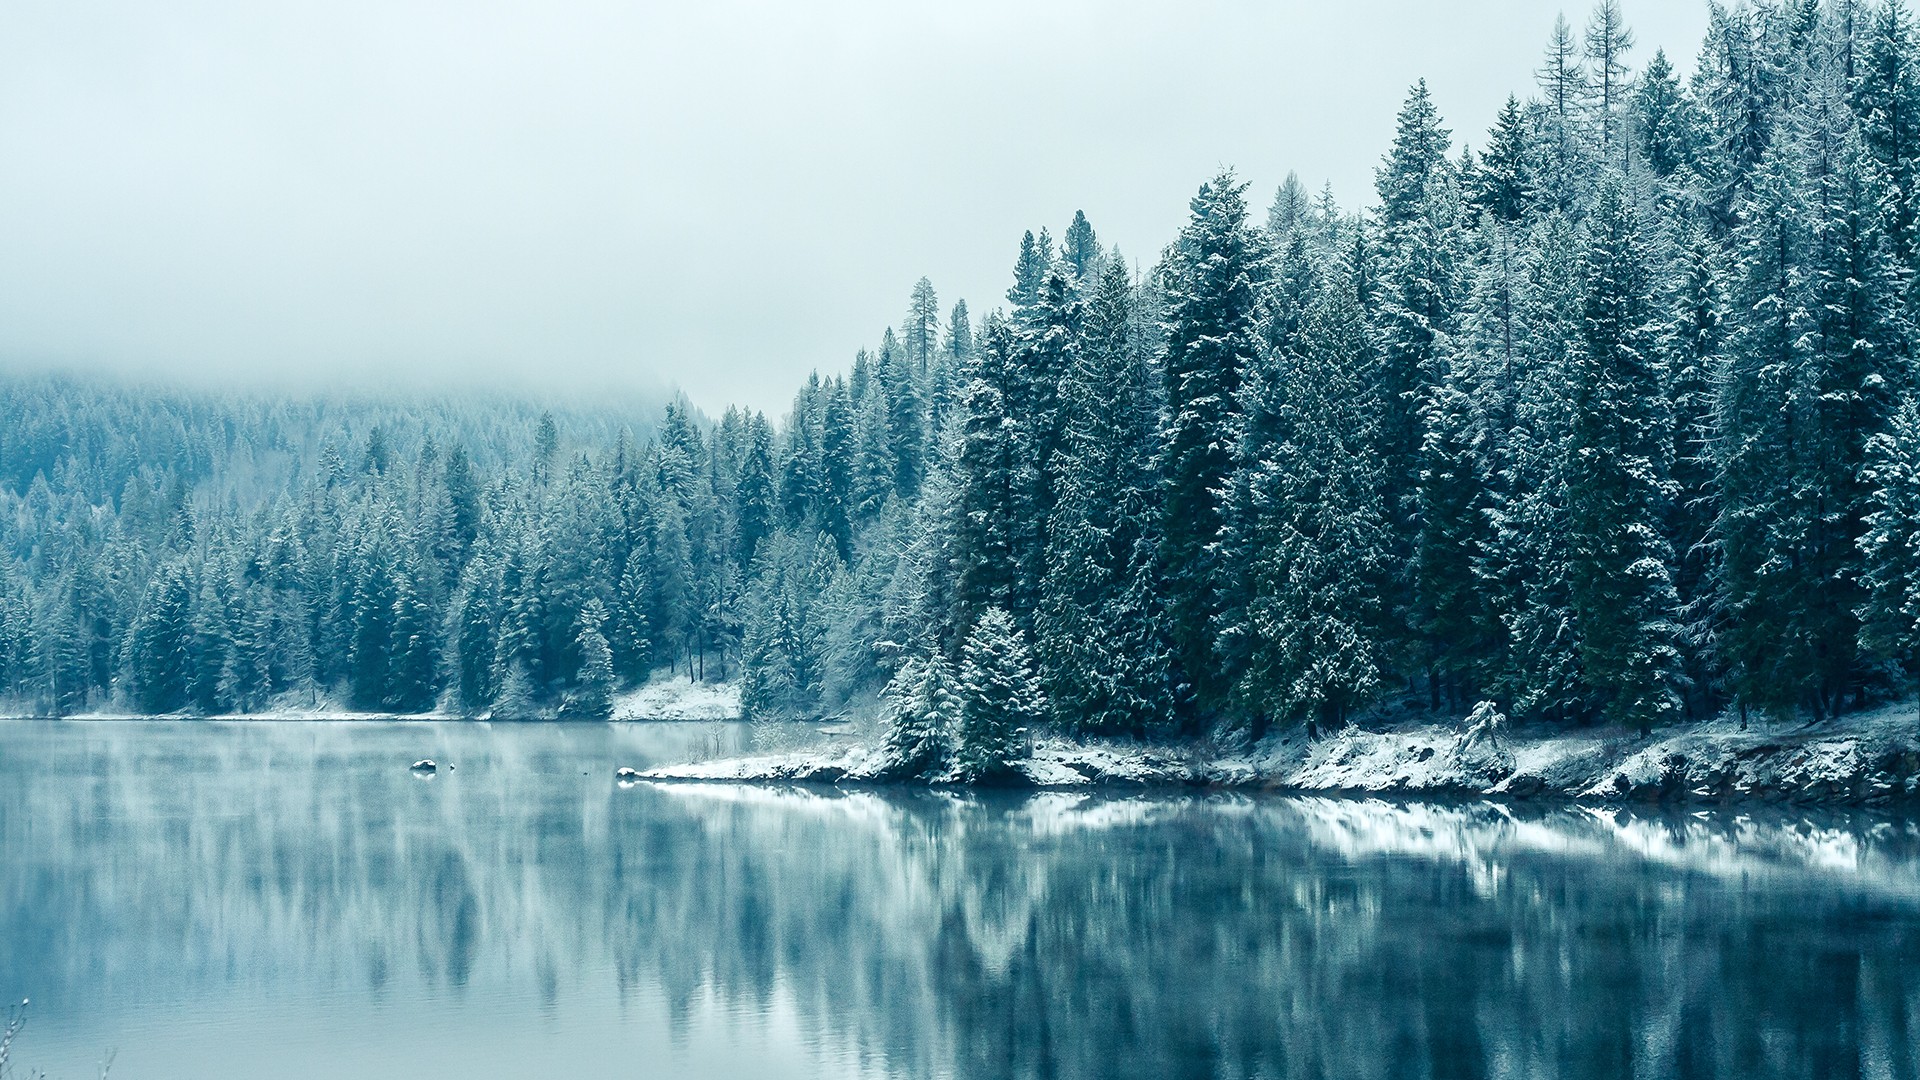 General 1920x1080 snow lake nature depth of field trees winter landscape water reflection turquoise ice cold outdoors